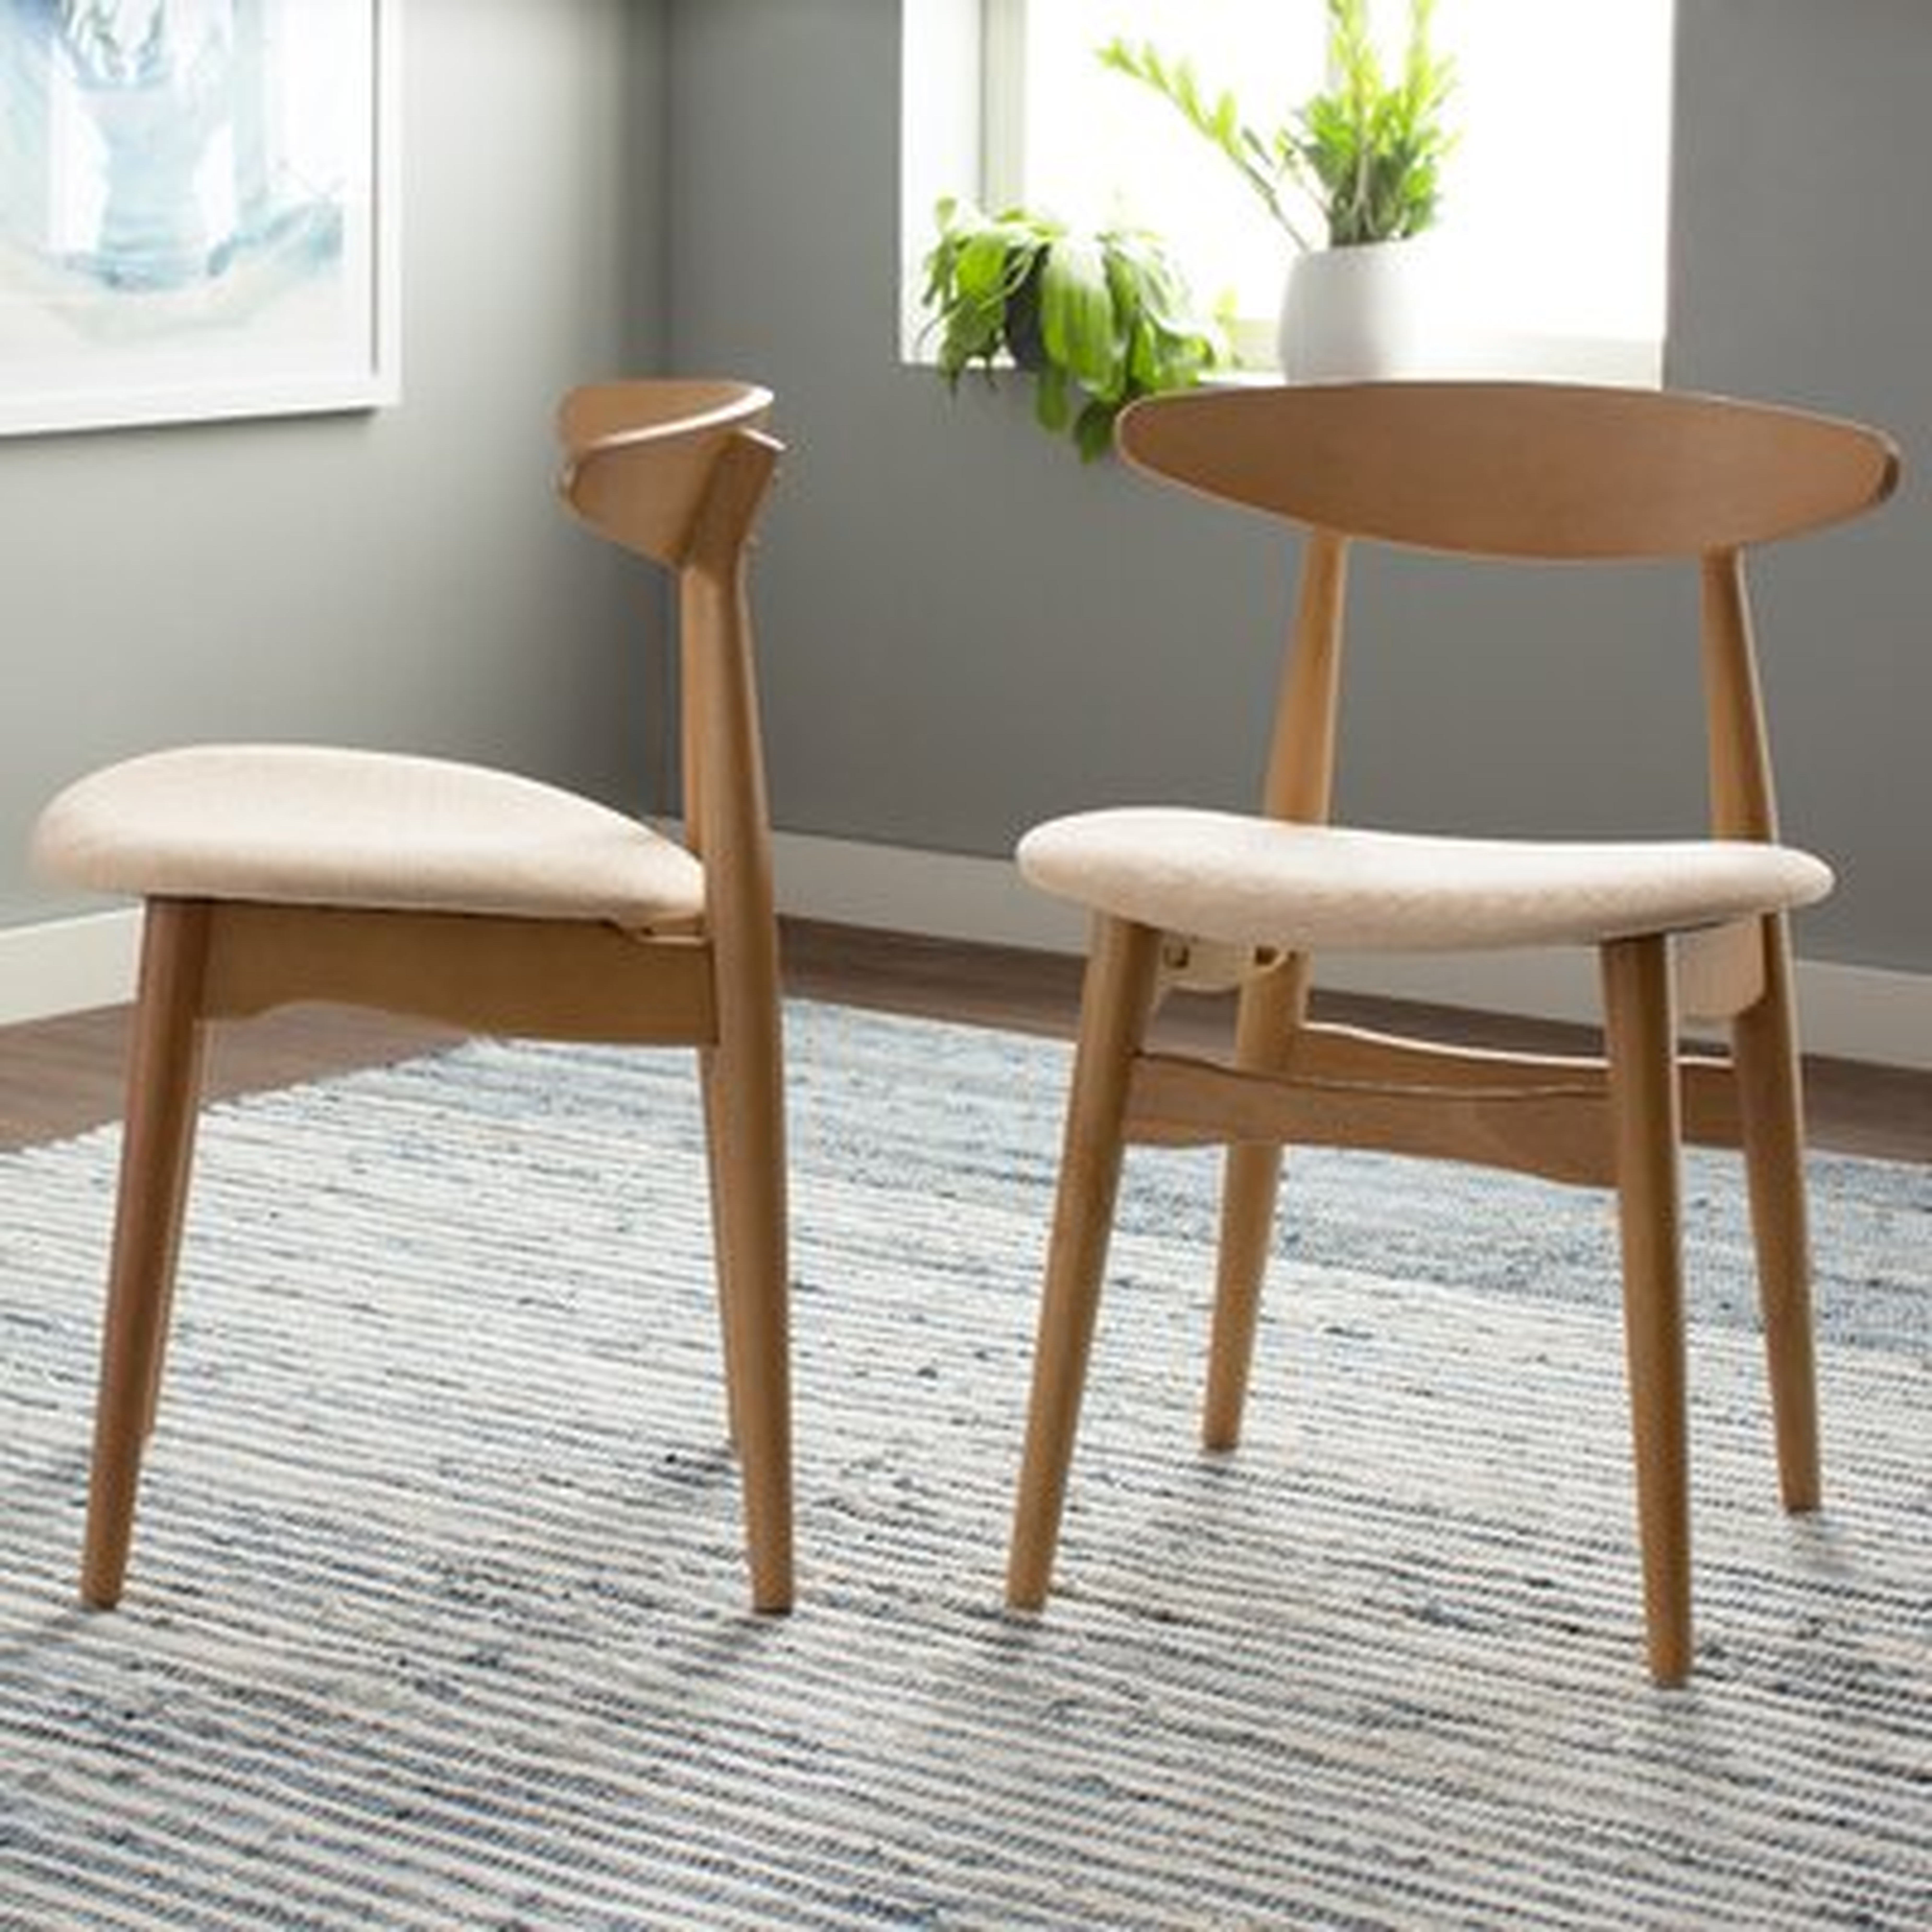 Degraw Upholstered Solid Wood Dining Chair (Set of 2) - AllModern